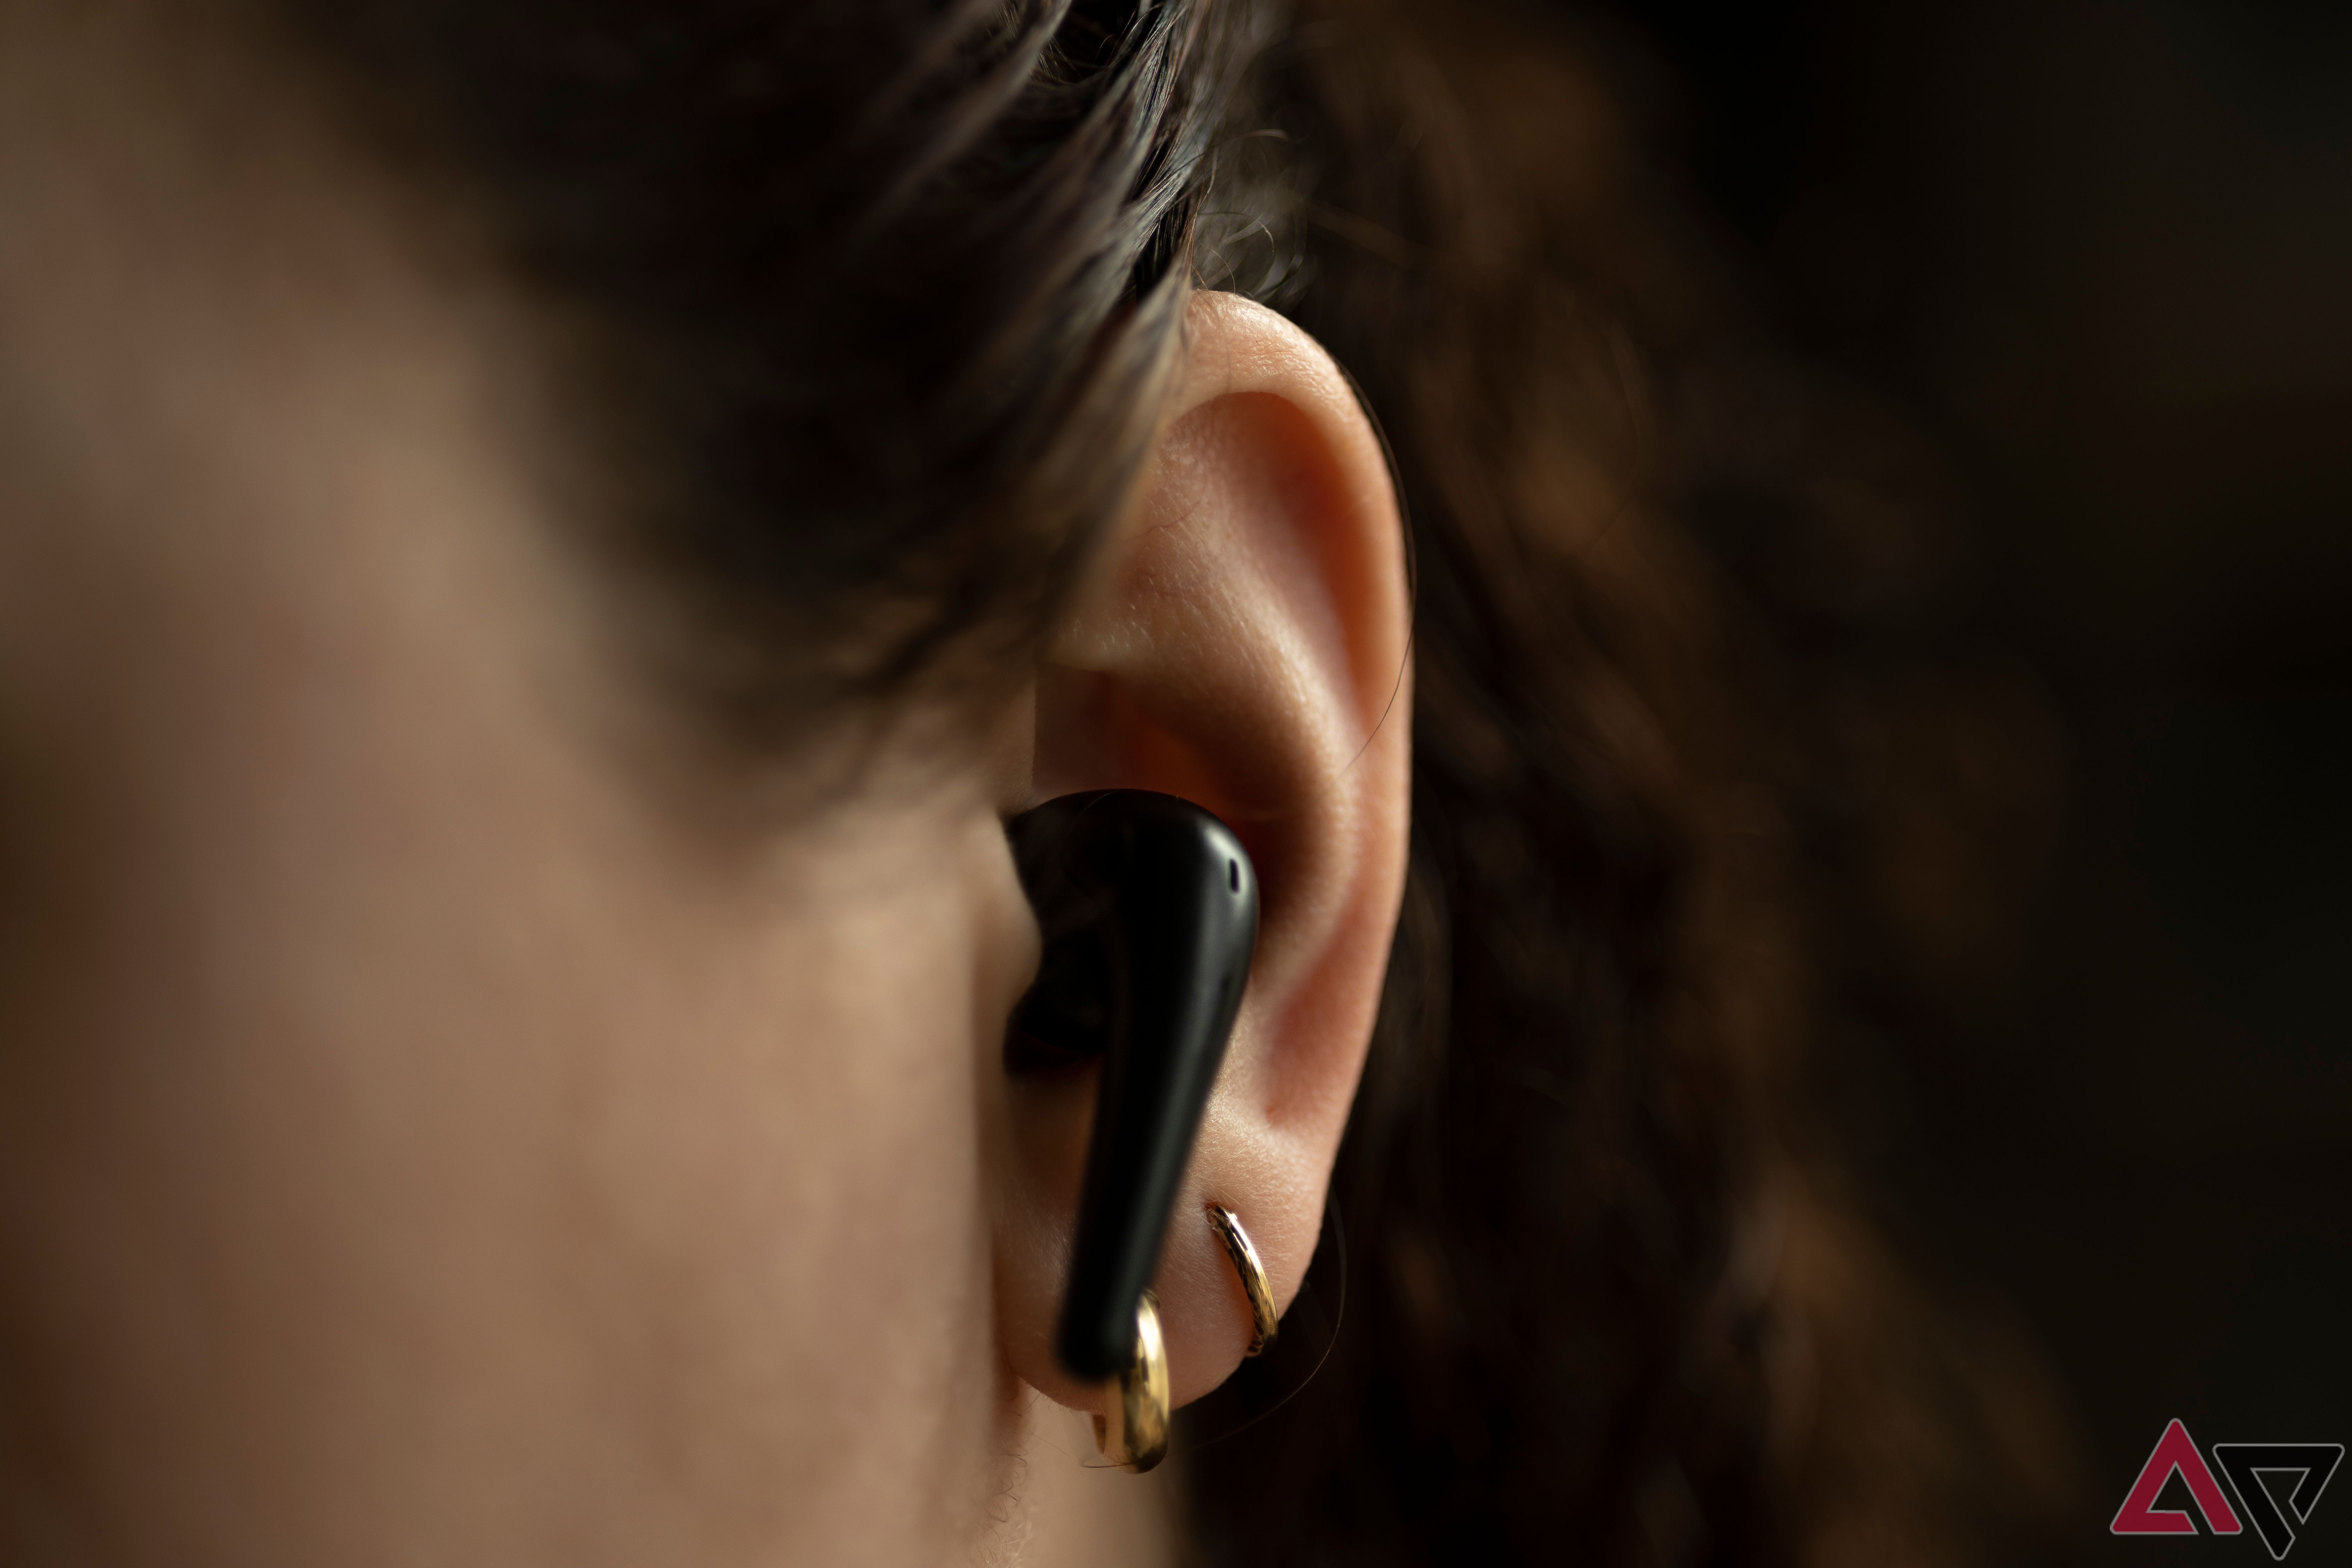 Close-up of a 1More Aero earphone in a woman's ear